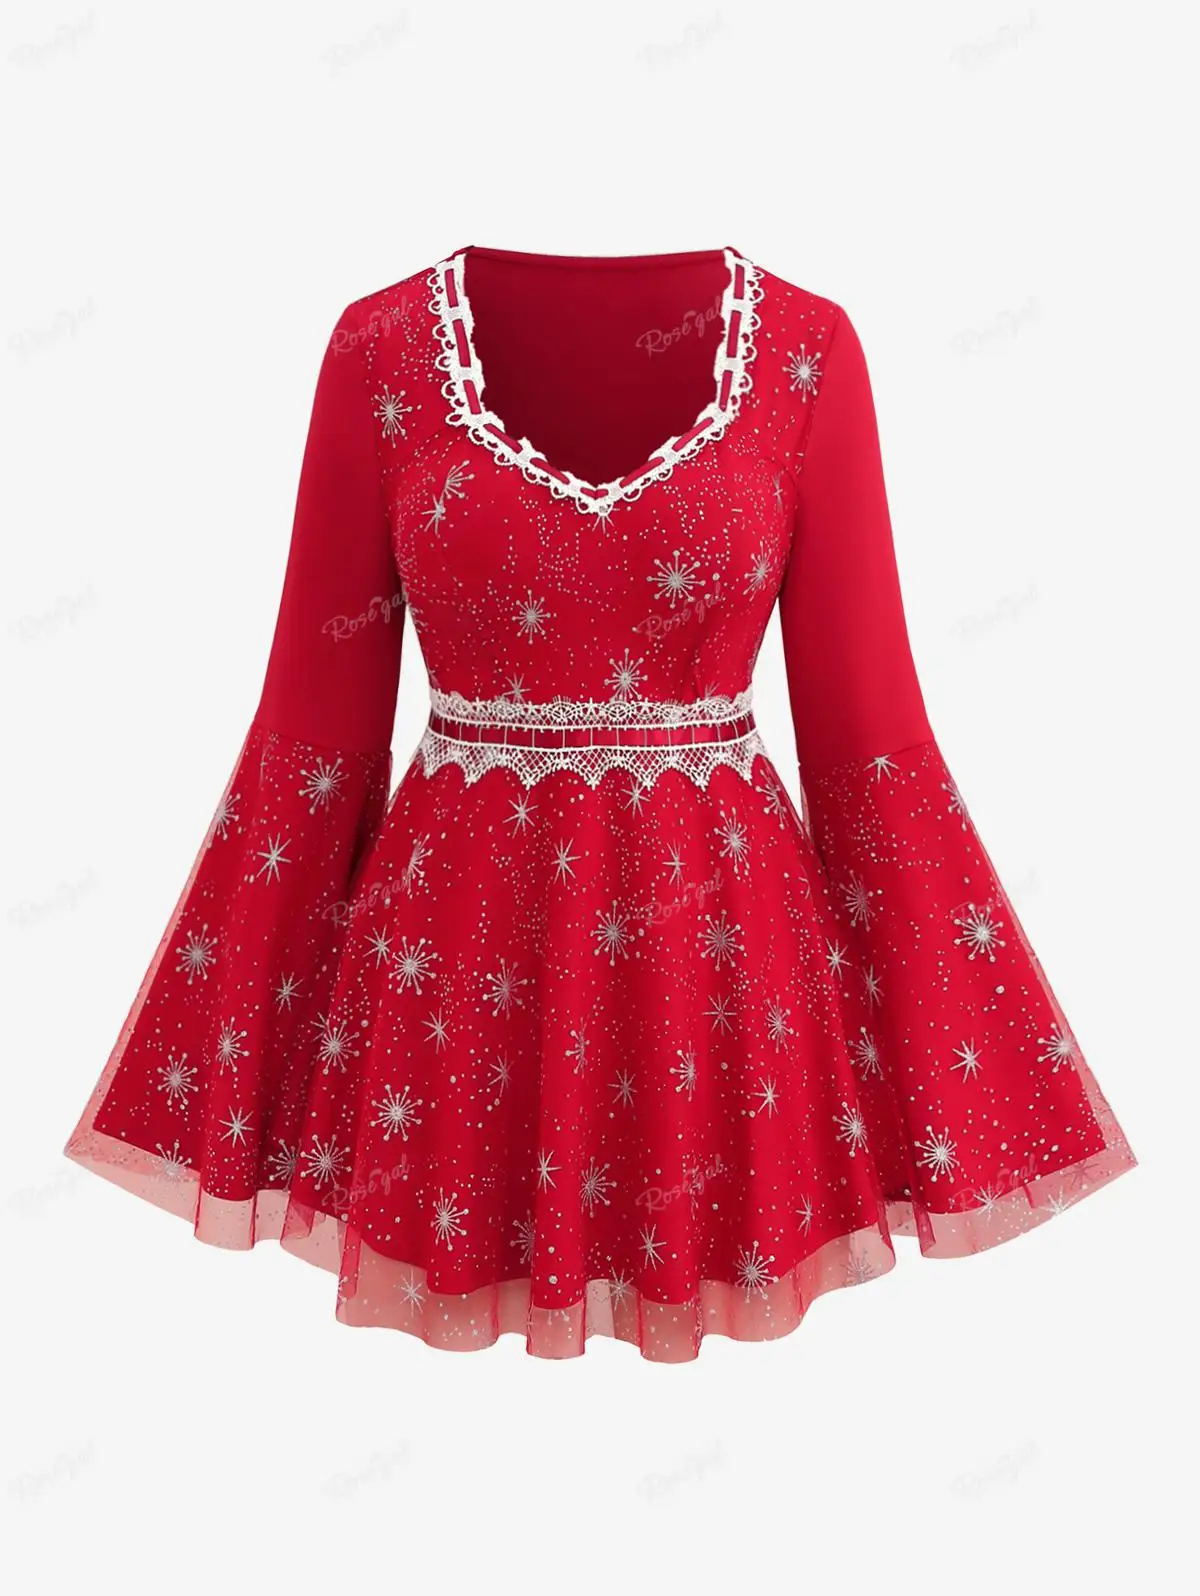 

ROSEGAL Plus Size Christmas T-shirt New Red Square Neck Snowflake Lace Trim Sheer Mesh Bell Sleeve Tops Women Autumn Winter Tee